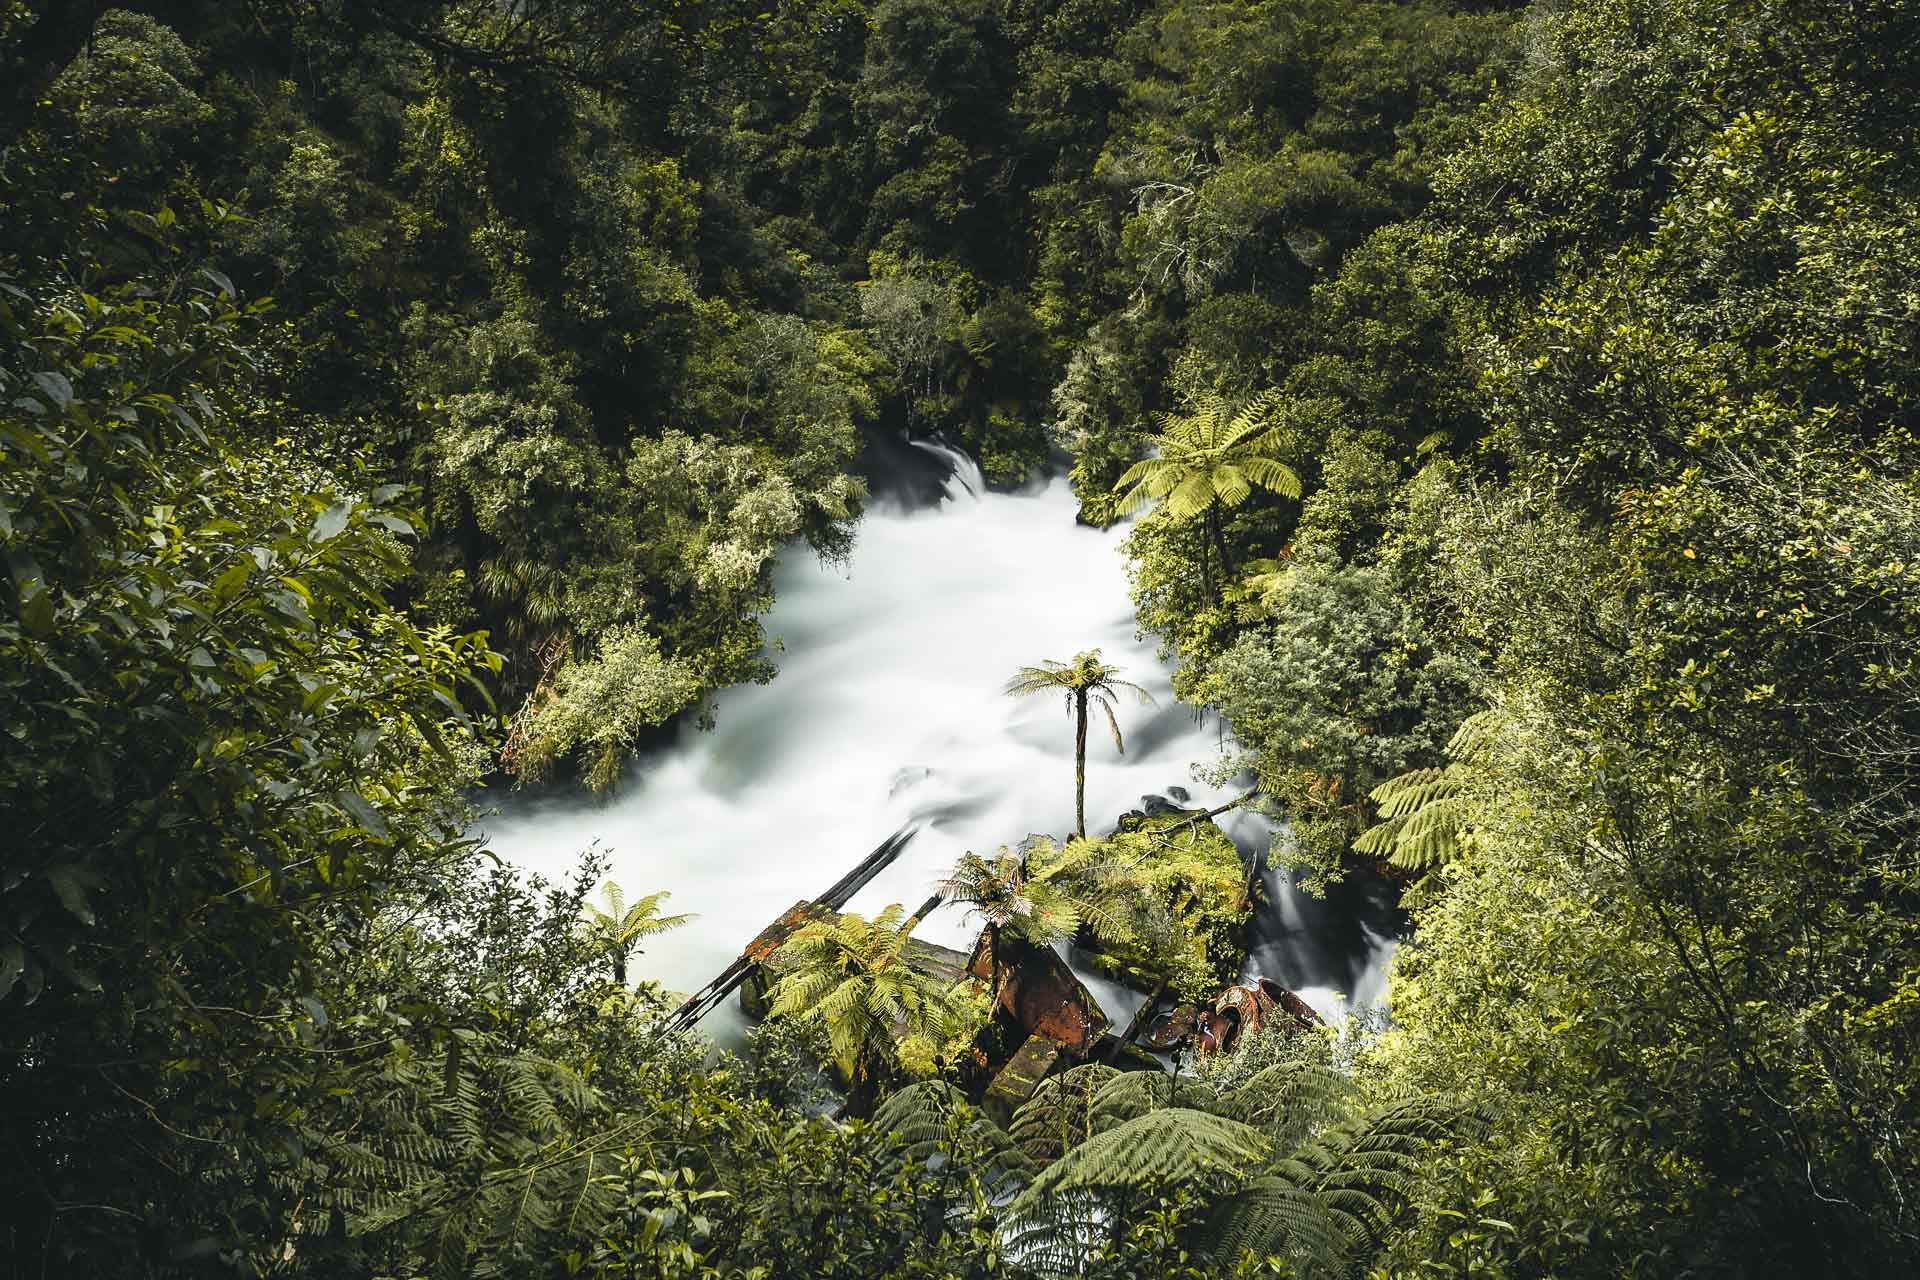 new zealand, falls, stream, long time  exposure, jungle, tree, water, white, green, palm, river, landscape, forest, woods, morning, grass, light, mist, colors, photography, sony alpha, best, travel, globe, view, hiking, santifaller photography, stefan, philipp, wander roam, 